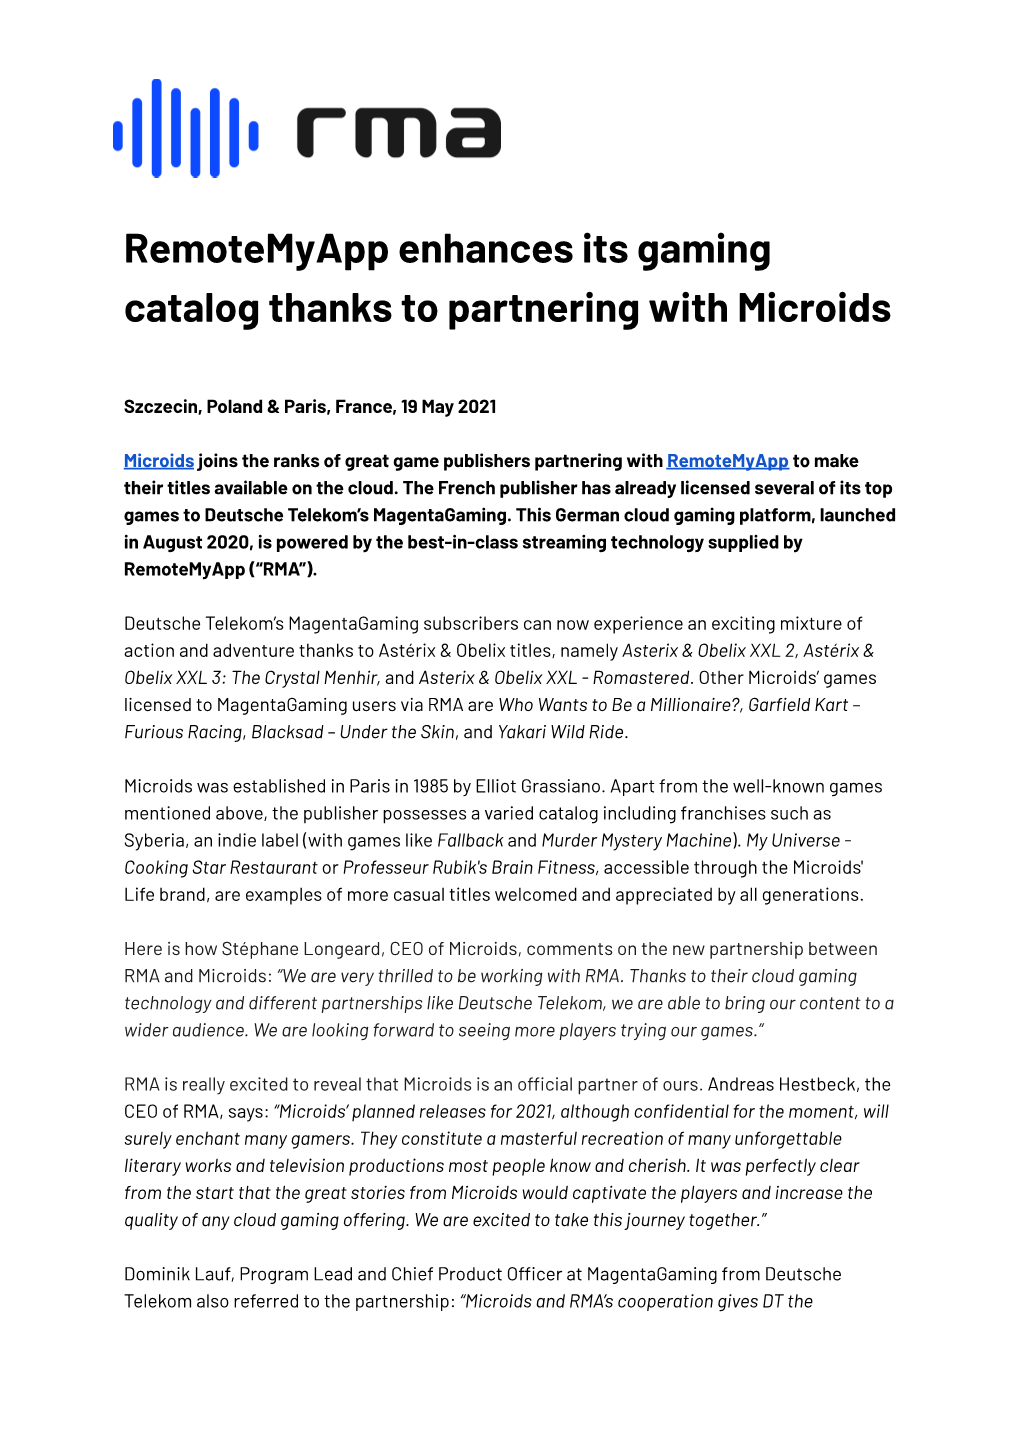 Remotemyapp Enhances Its Gaming Catalog Thanks to Partnering with Microids